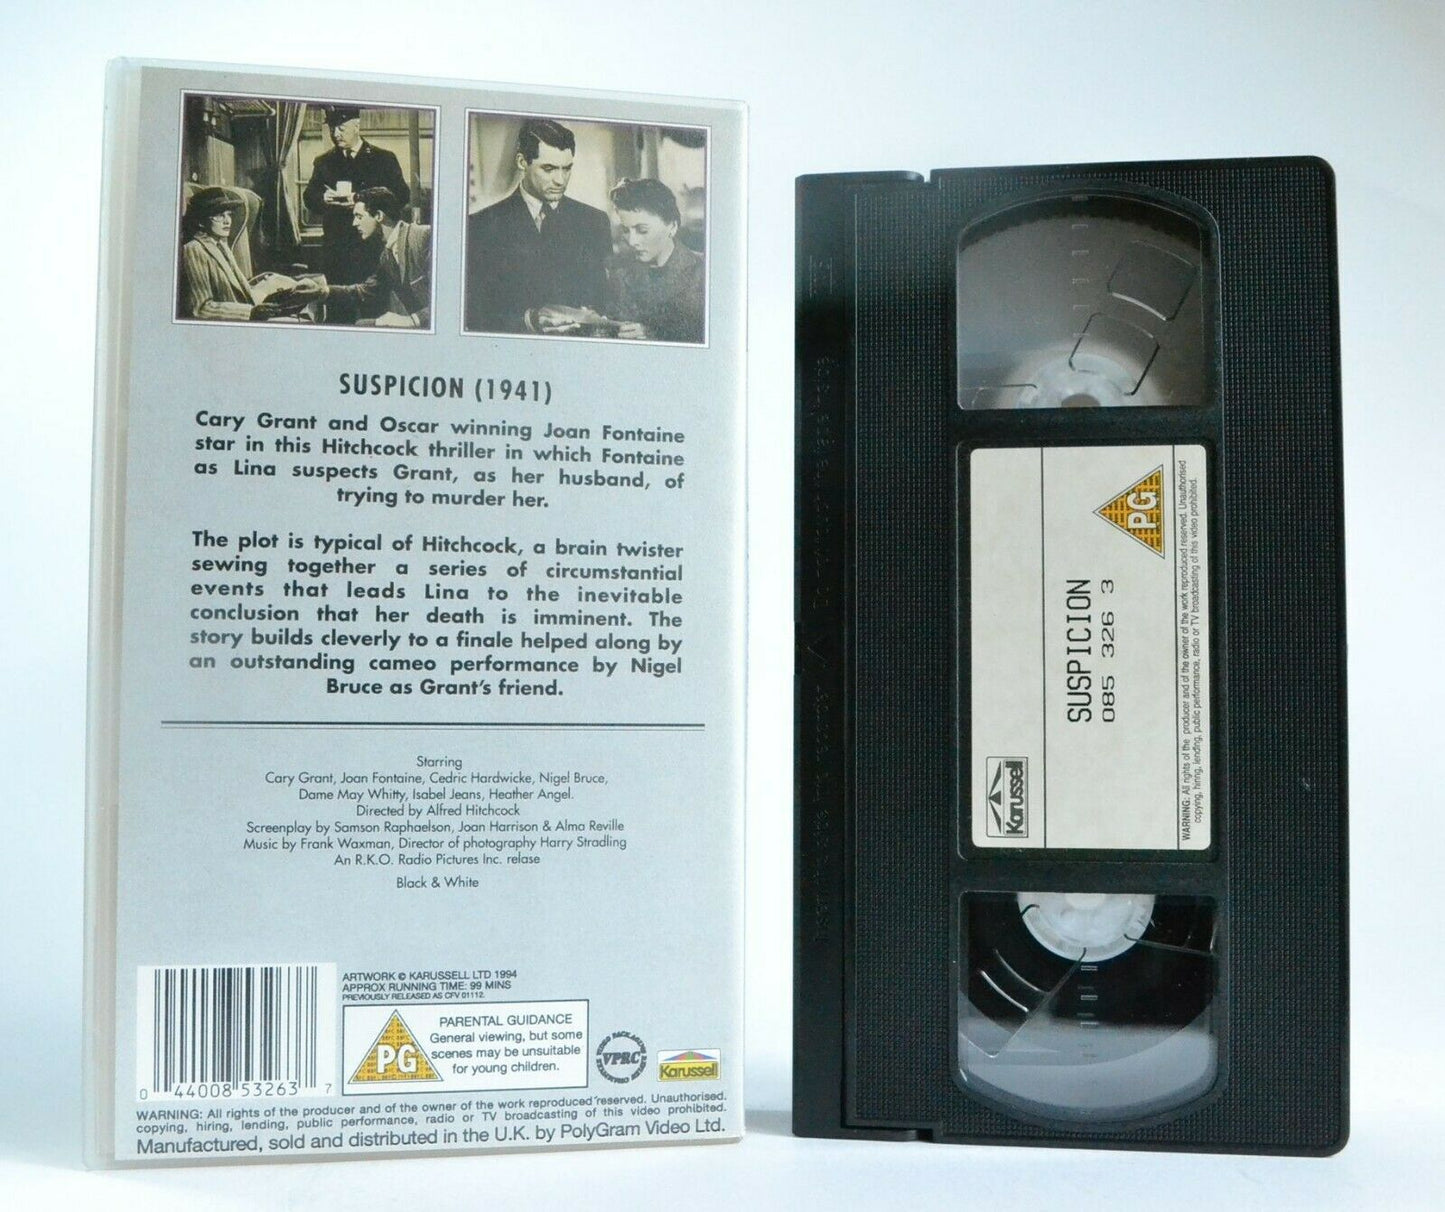 Suspicion (1941): An Alfred Hitchcock Thriller - Cary Grant/Joan Fontaine - VHS-